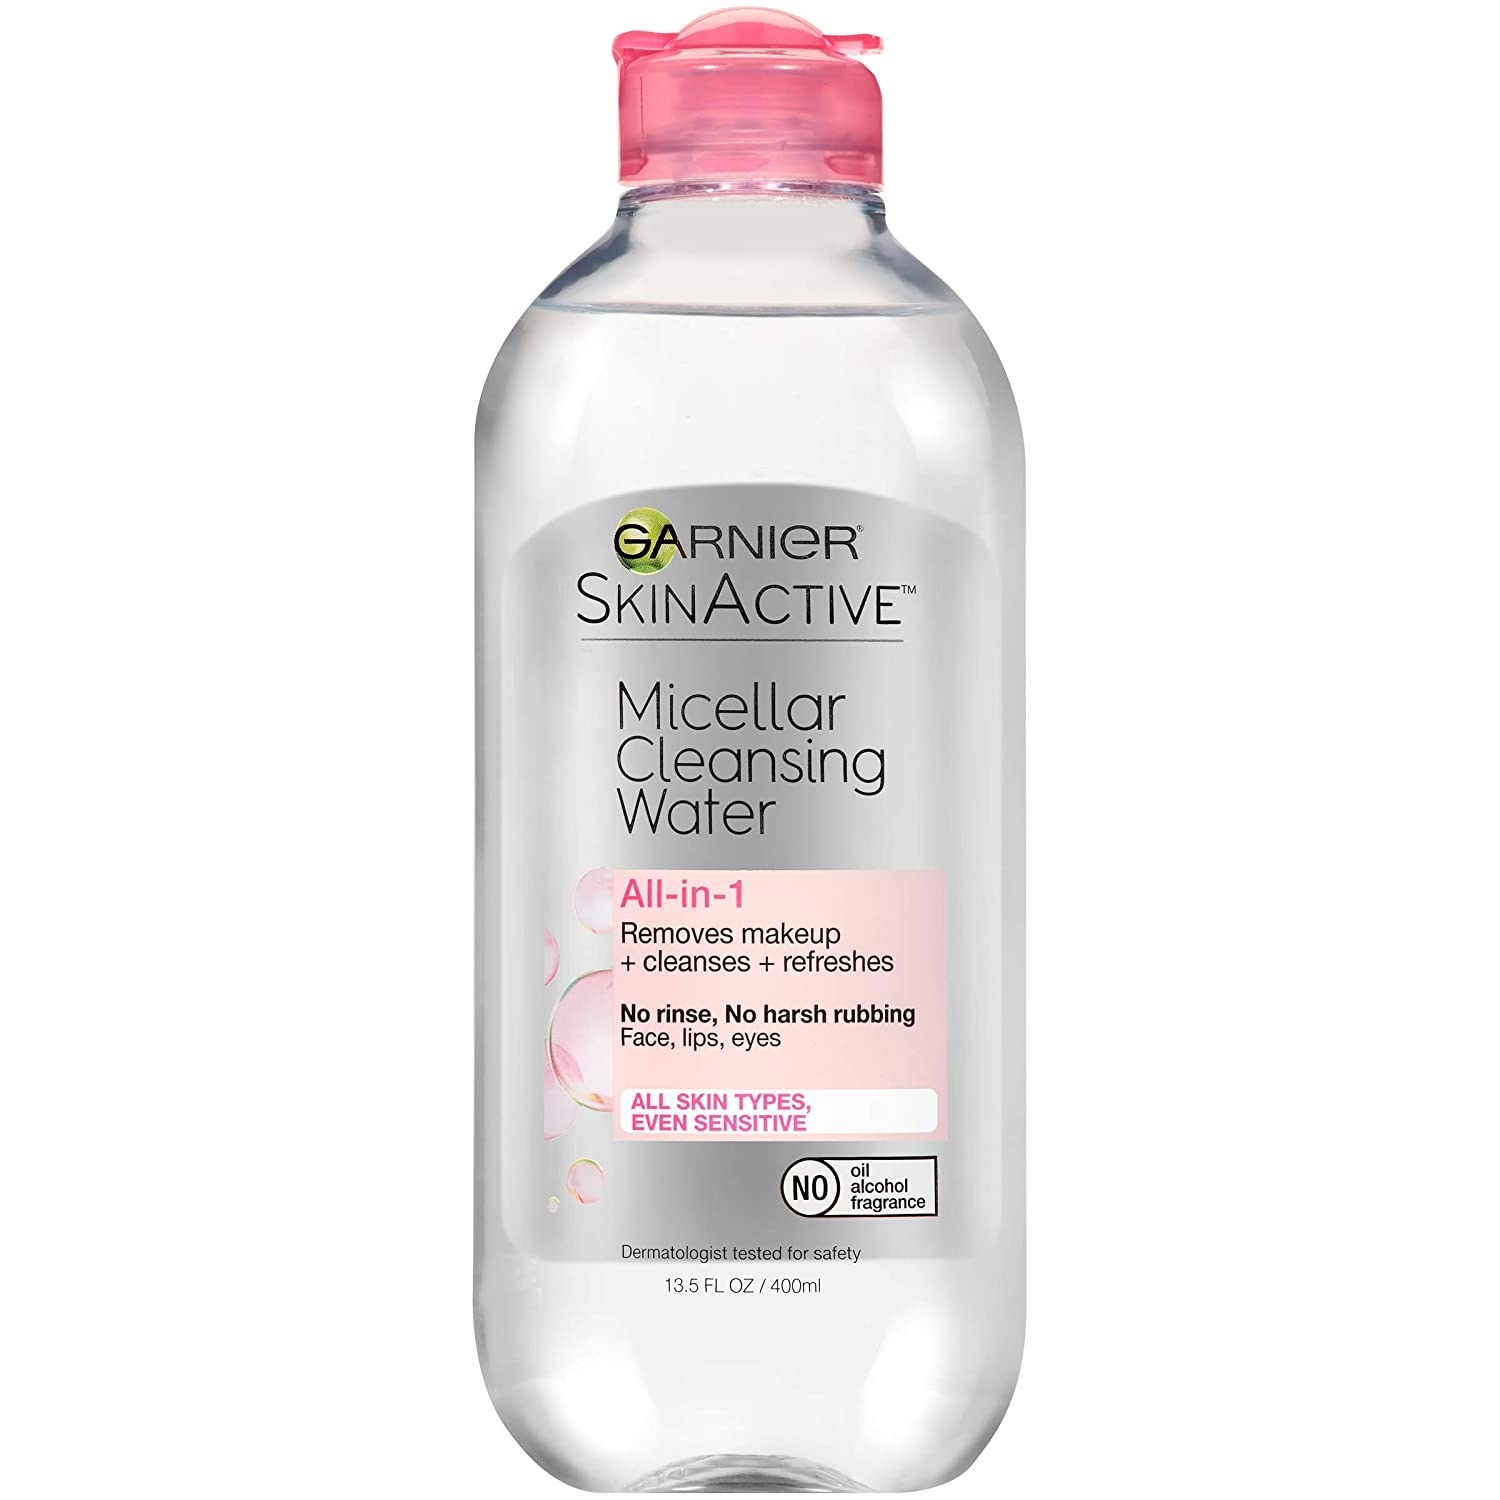 A bottle of the Garnier Micellar Cleansing Water.